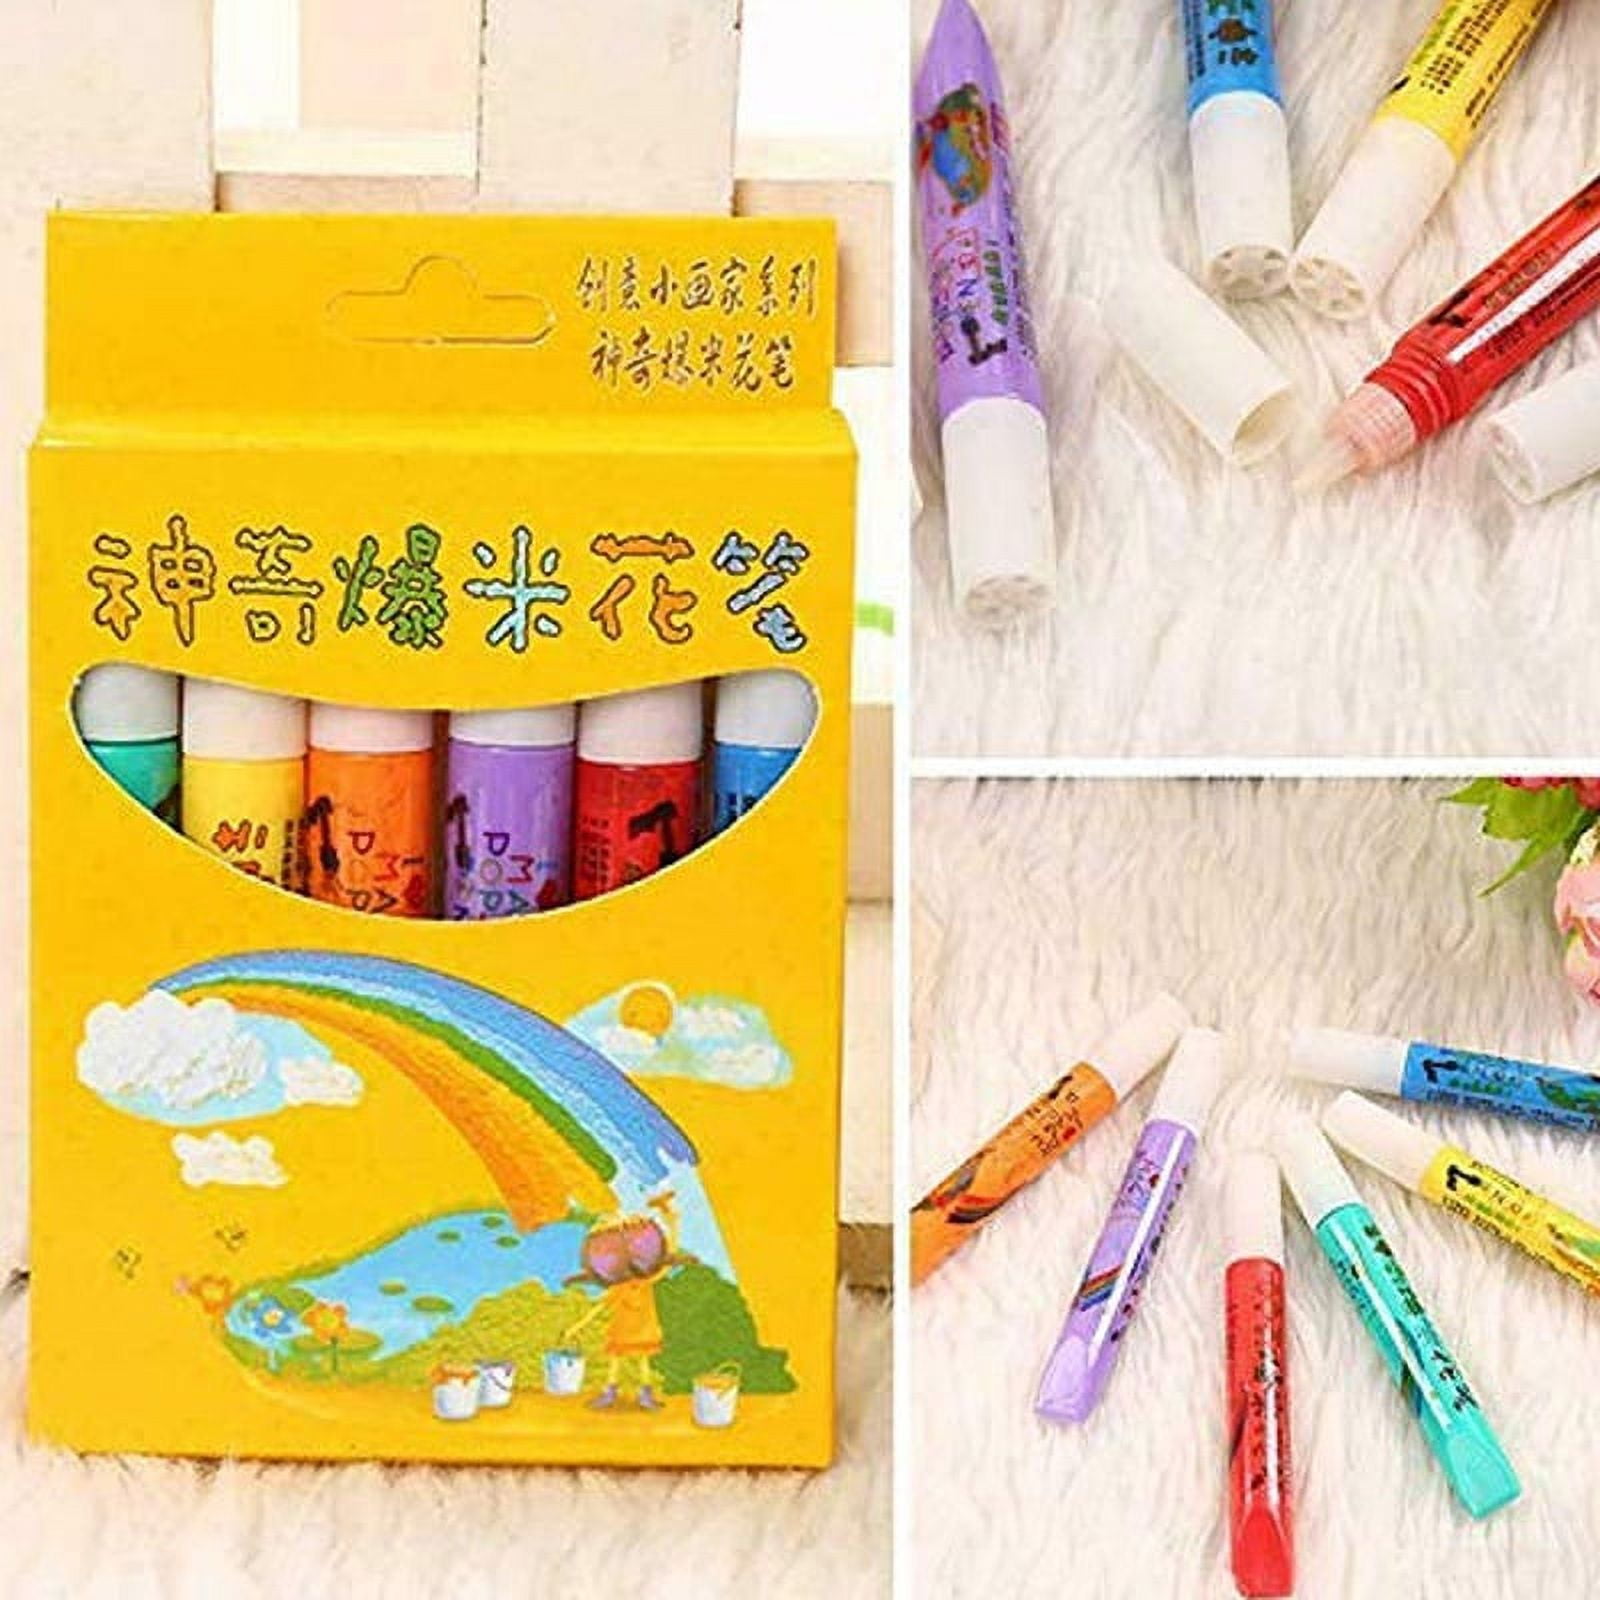 Puffy 3D Art Pens - Ink Puffs Up Like Popcorn Just DIY Hairdryer Use 6pcs  US